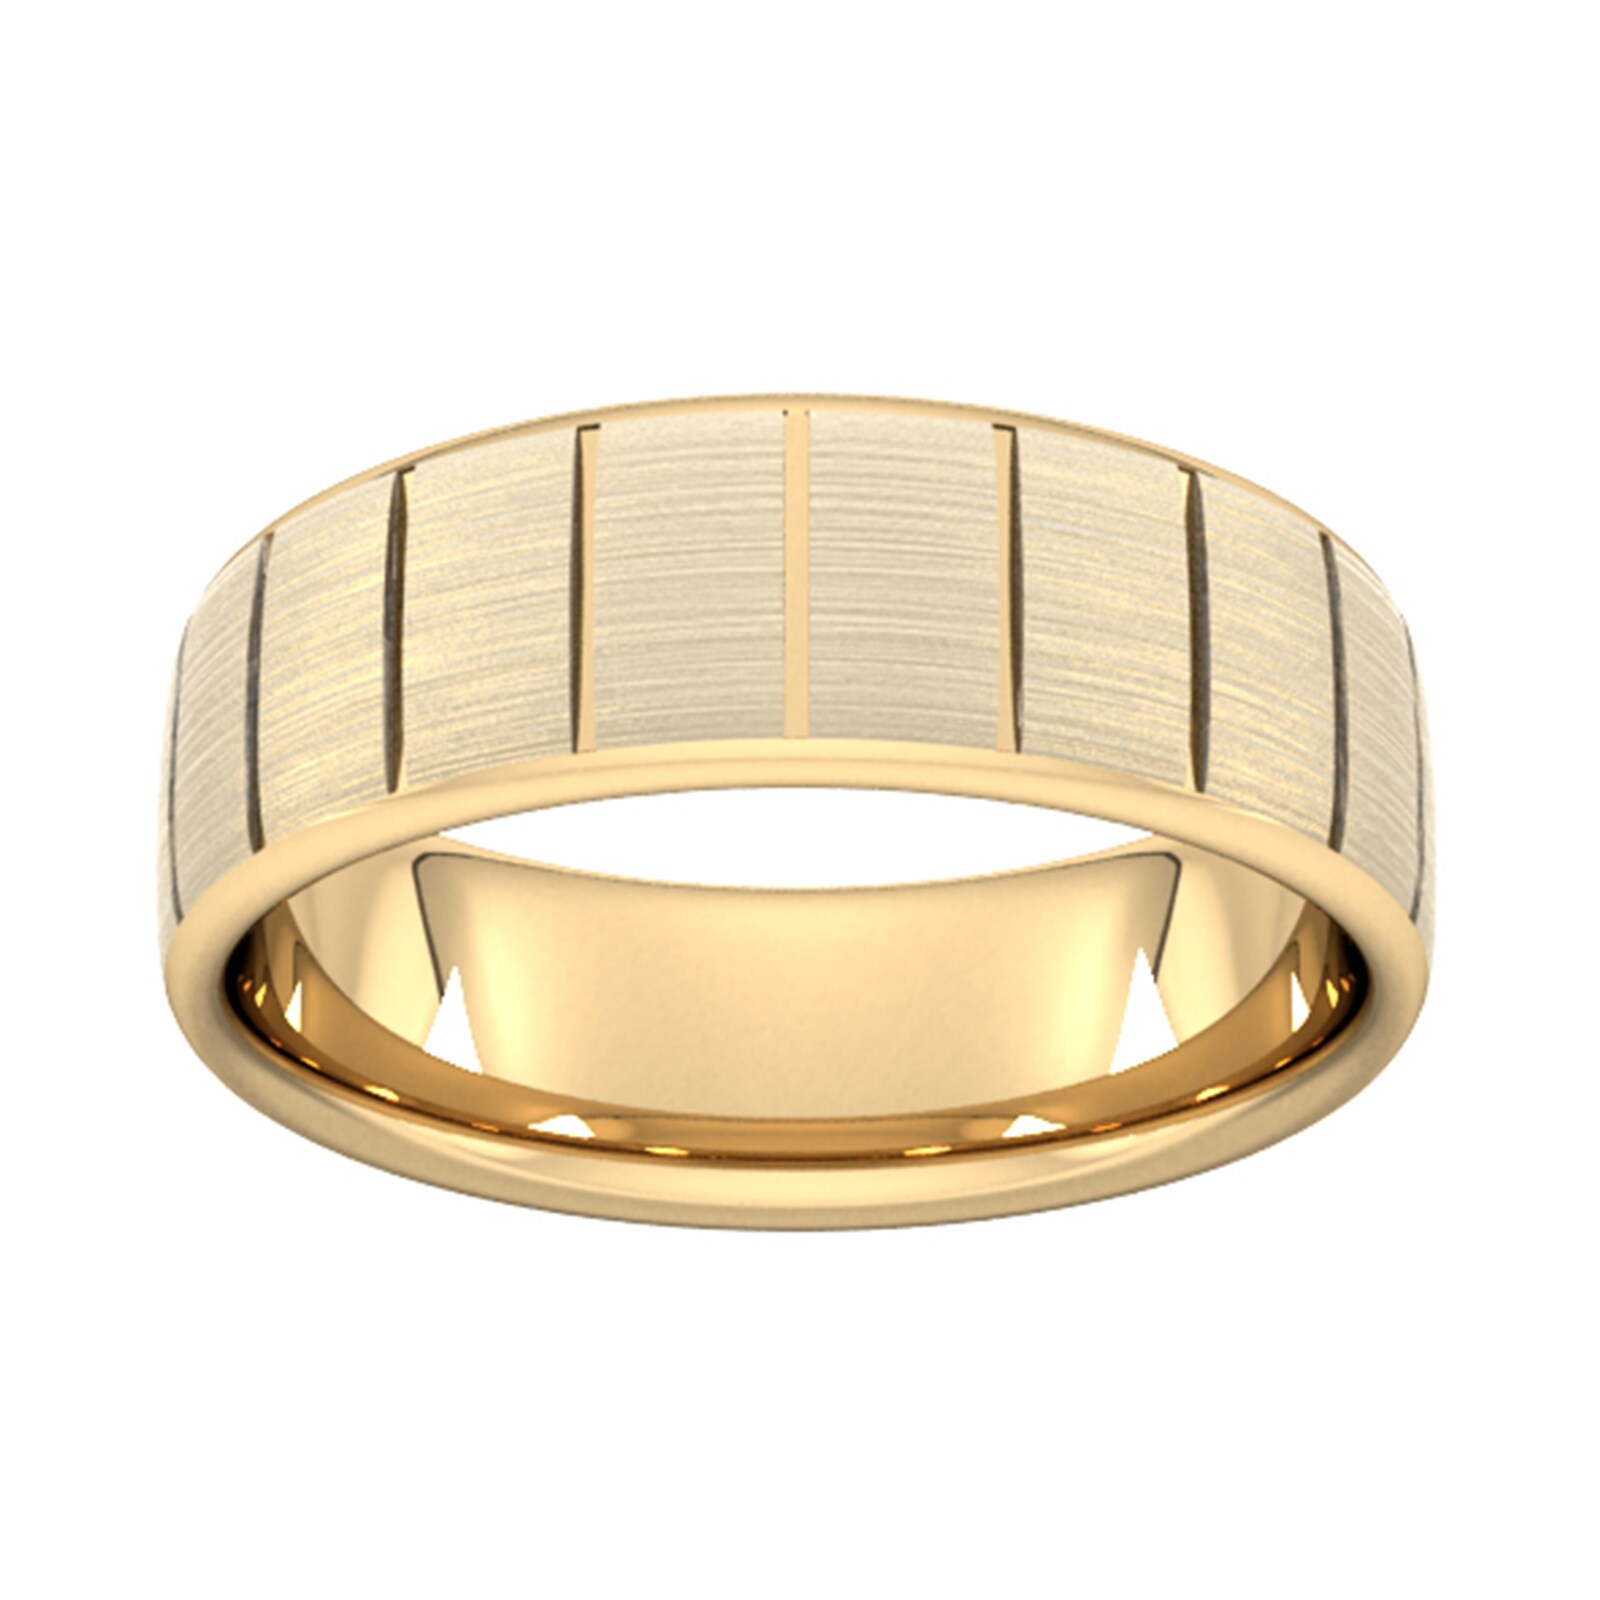 7mm Traditional Court Heavy Vertical Lines Wedding Ring In 9 Carat Yellow Gold - Ring Size R